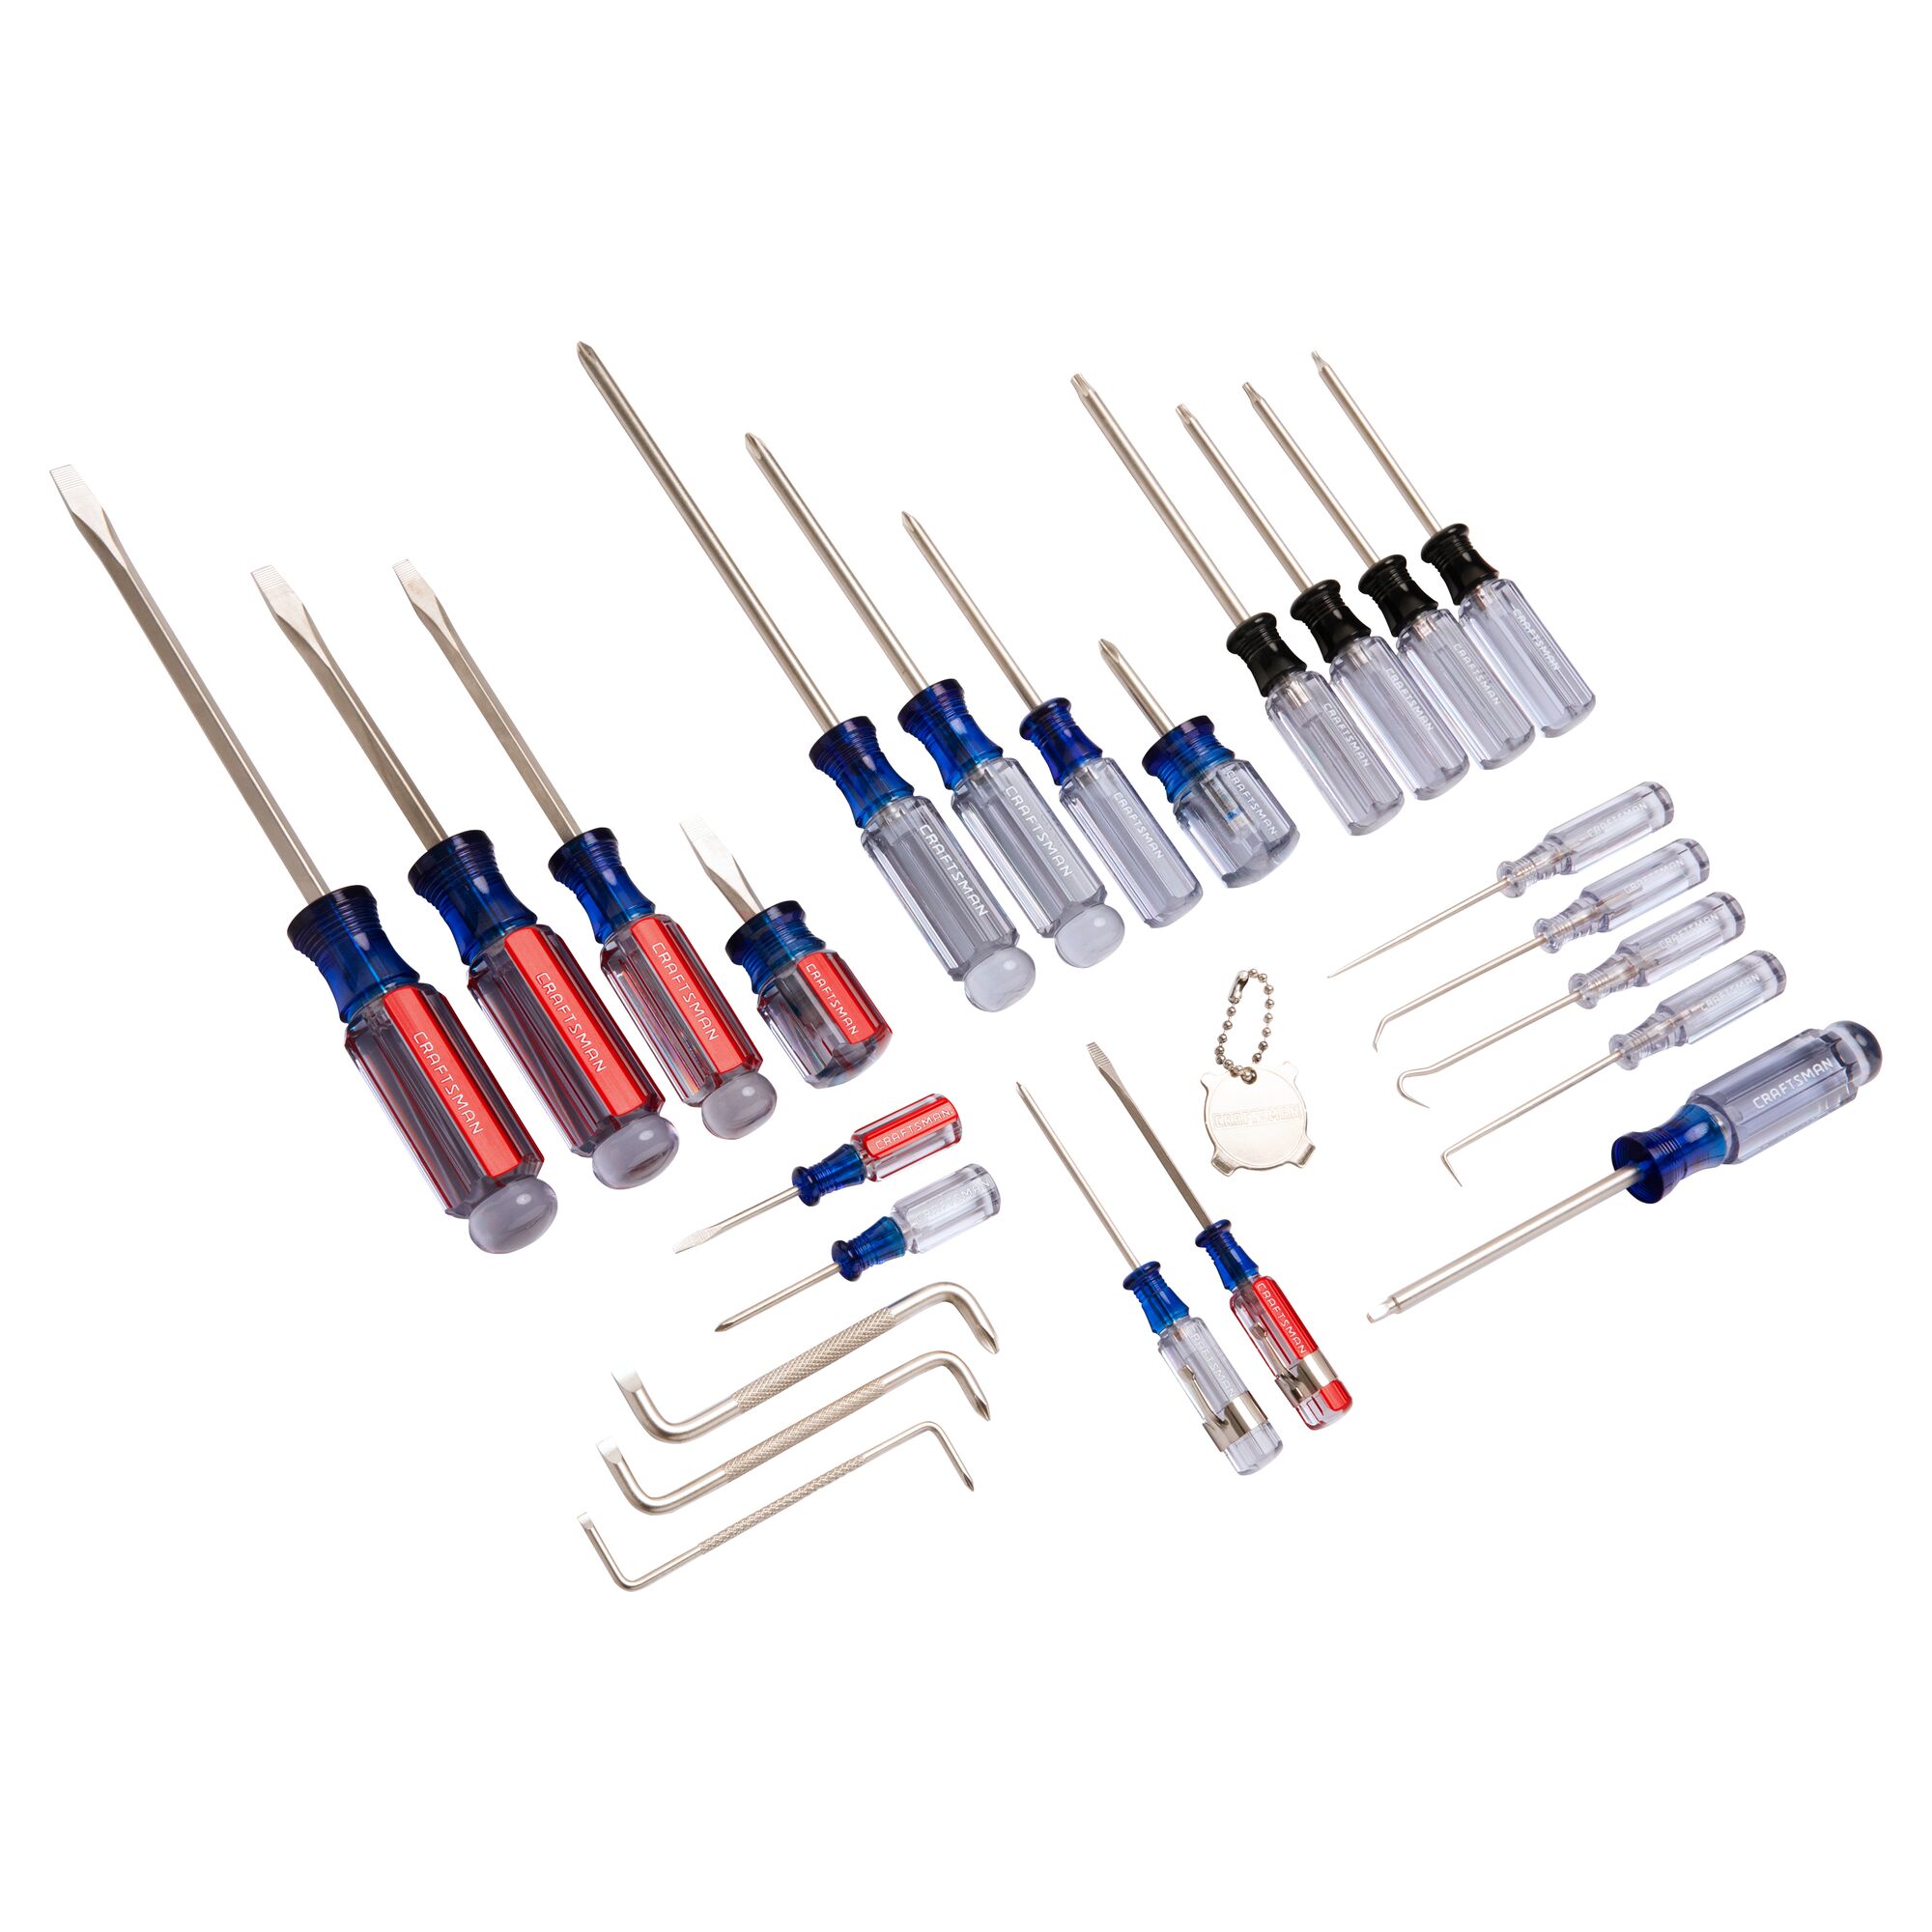 View of CRAFTSMAN Screwdrivers: Acetate on white background